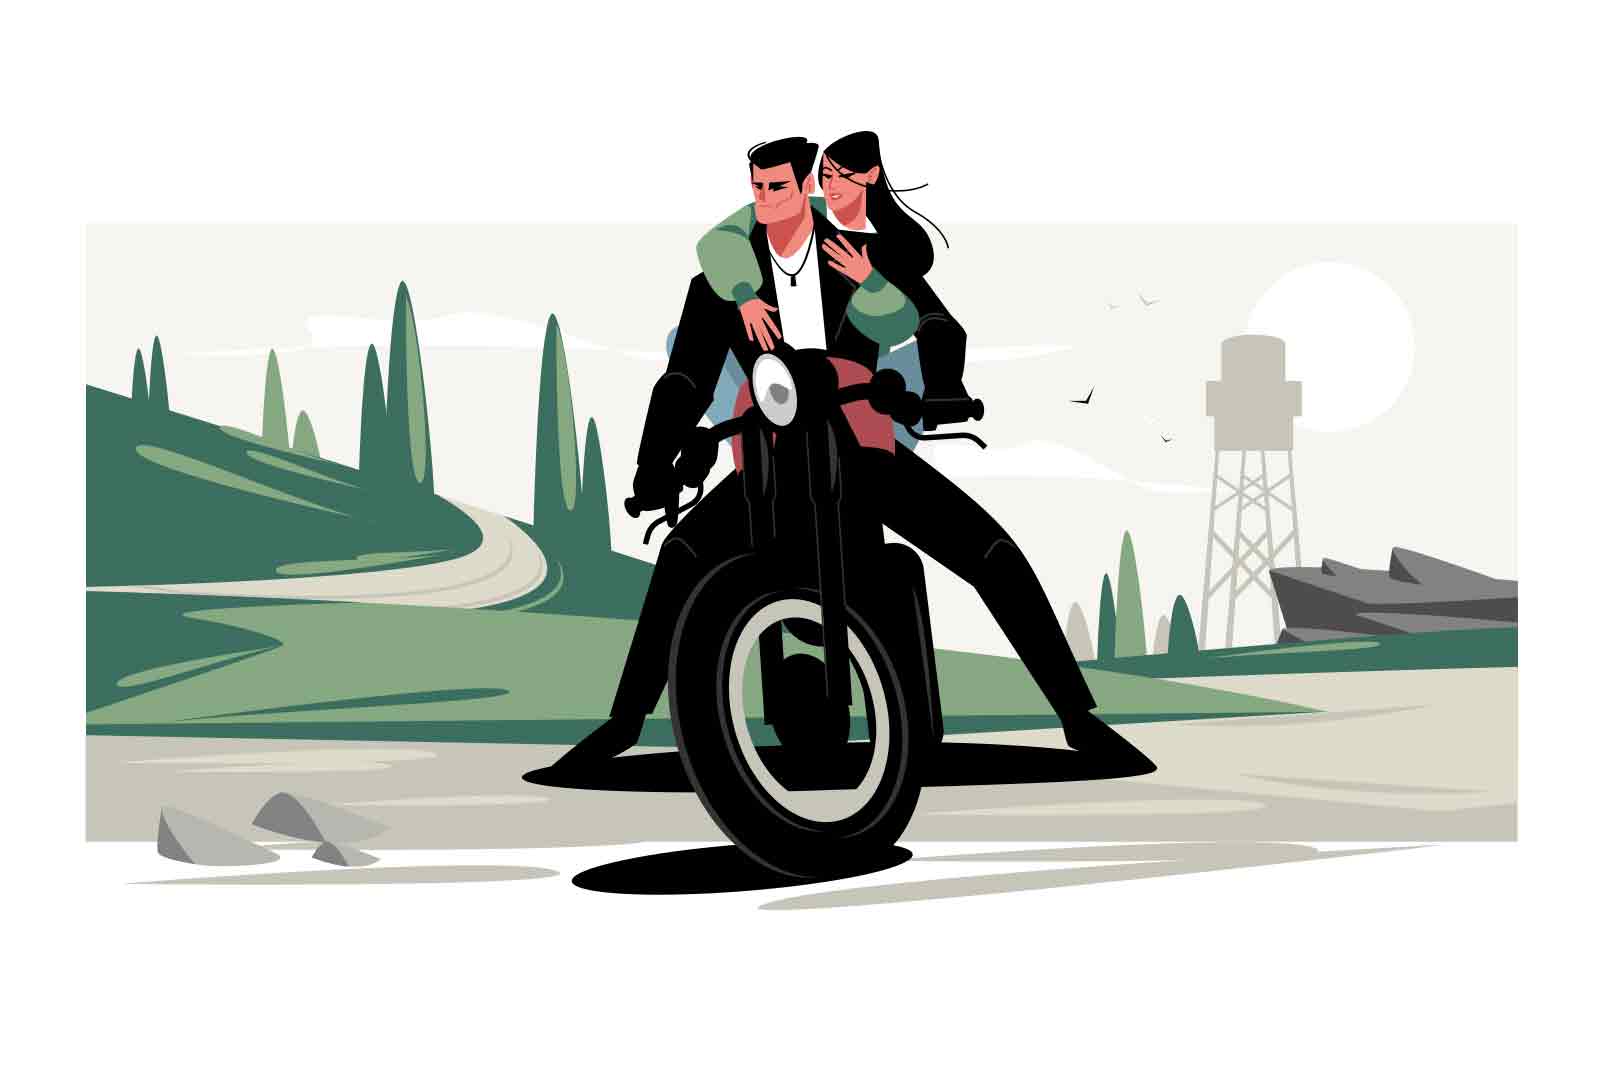 Guy biker with girlfriend sitting on bike vector illustration. Couple on motorcycle flat style design. Extreme sport and freedom lifestyle concept